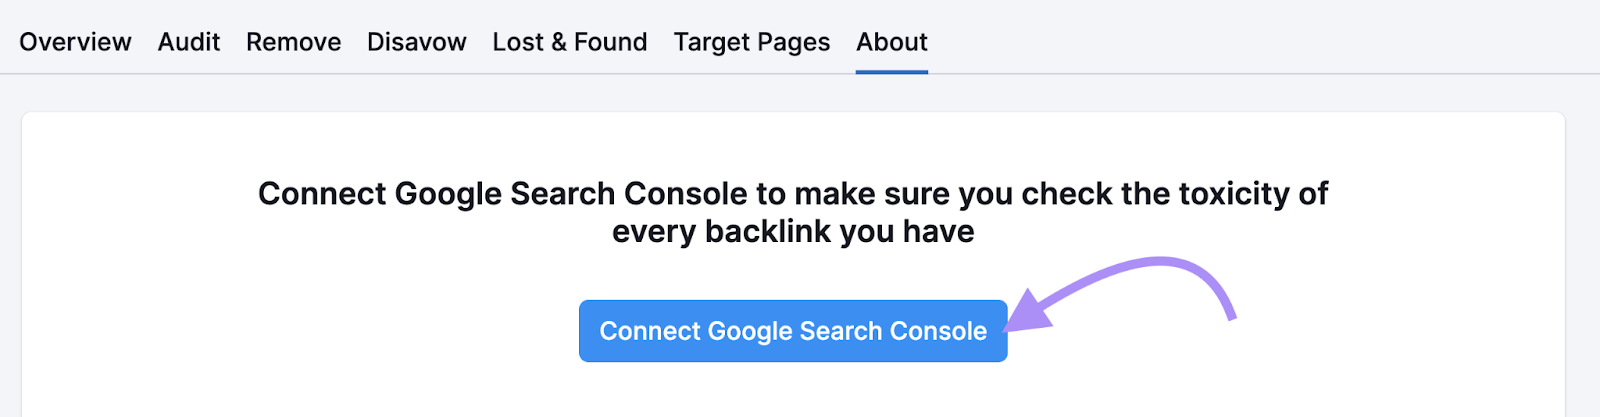 "Connect Google Search Console" button highlighted